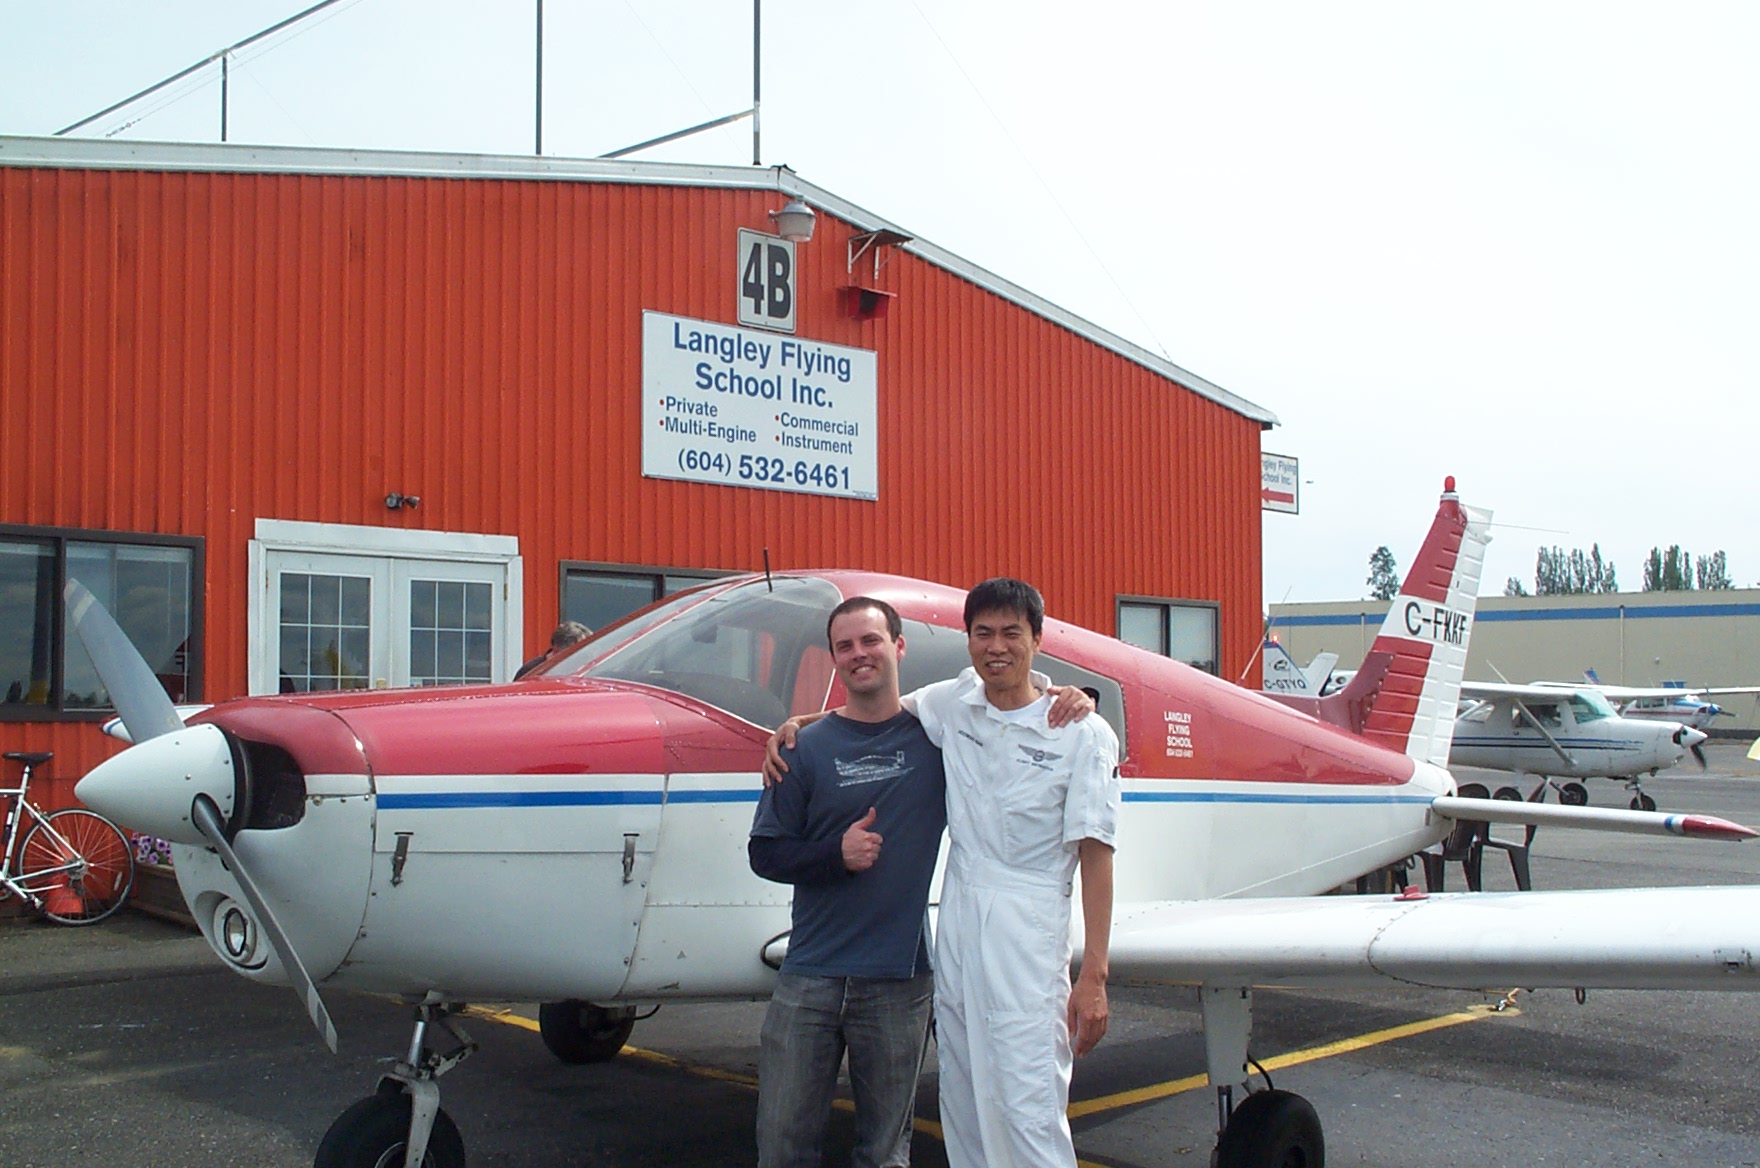 Zenon Garnett with his Flight Instructor, Hoowan Nam, after the successfrul completion of Zen's Commercial Pilot Flight Test with Pilot Examiner Paul Harris on June 30, 2010. Congrats to both of you! Langley Flying School.